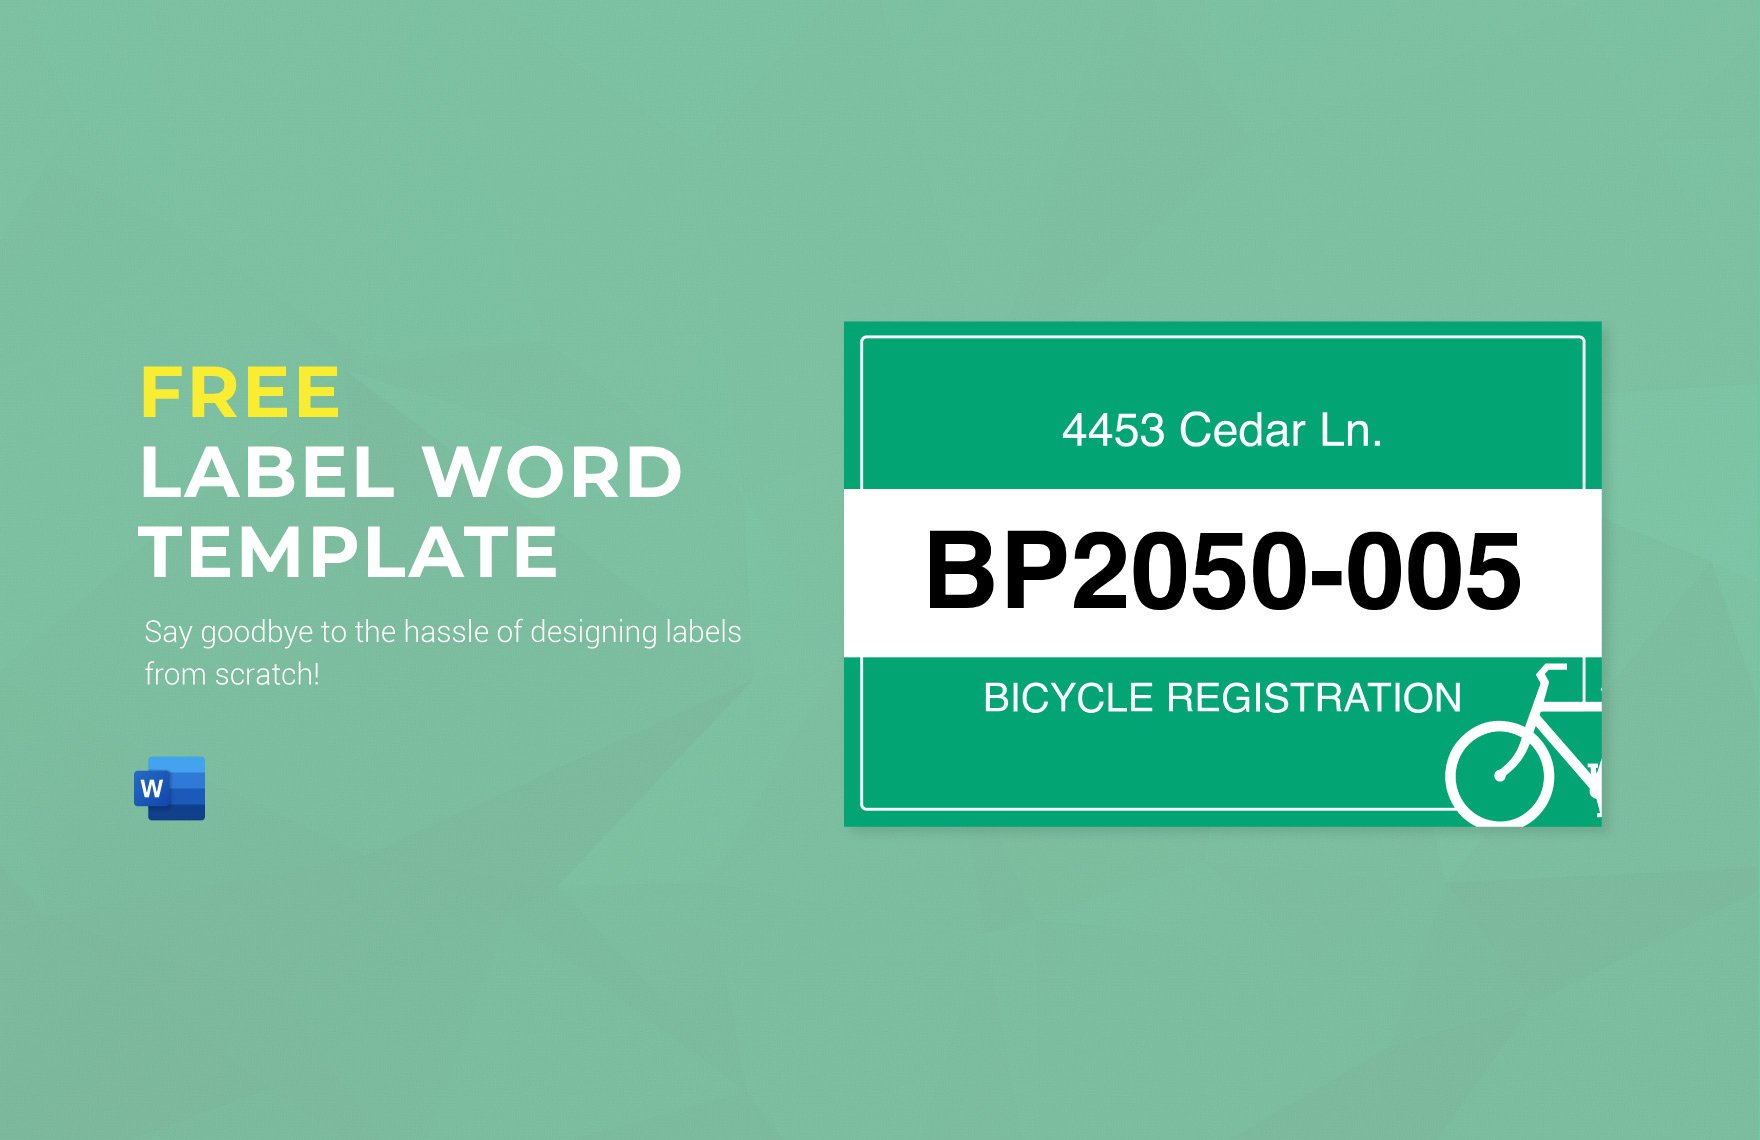 Free Label Word Template in Word